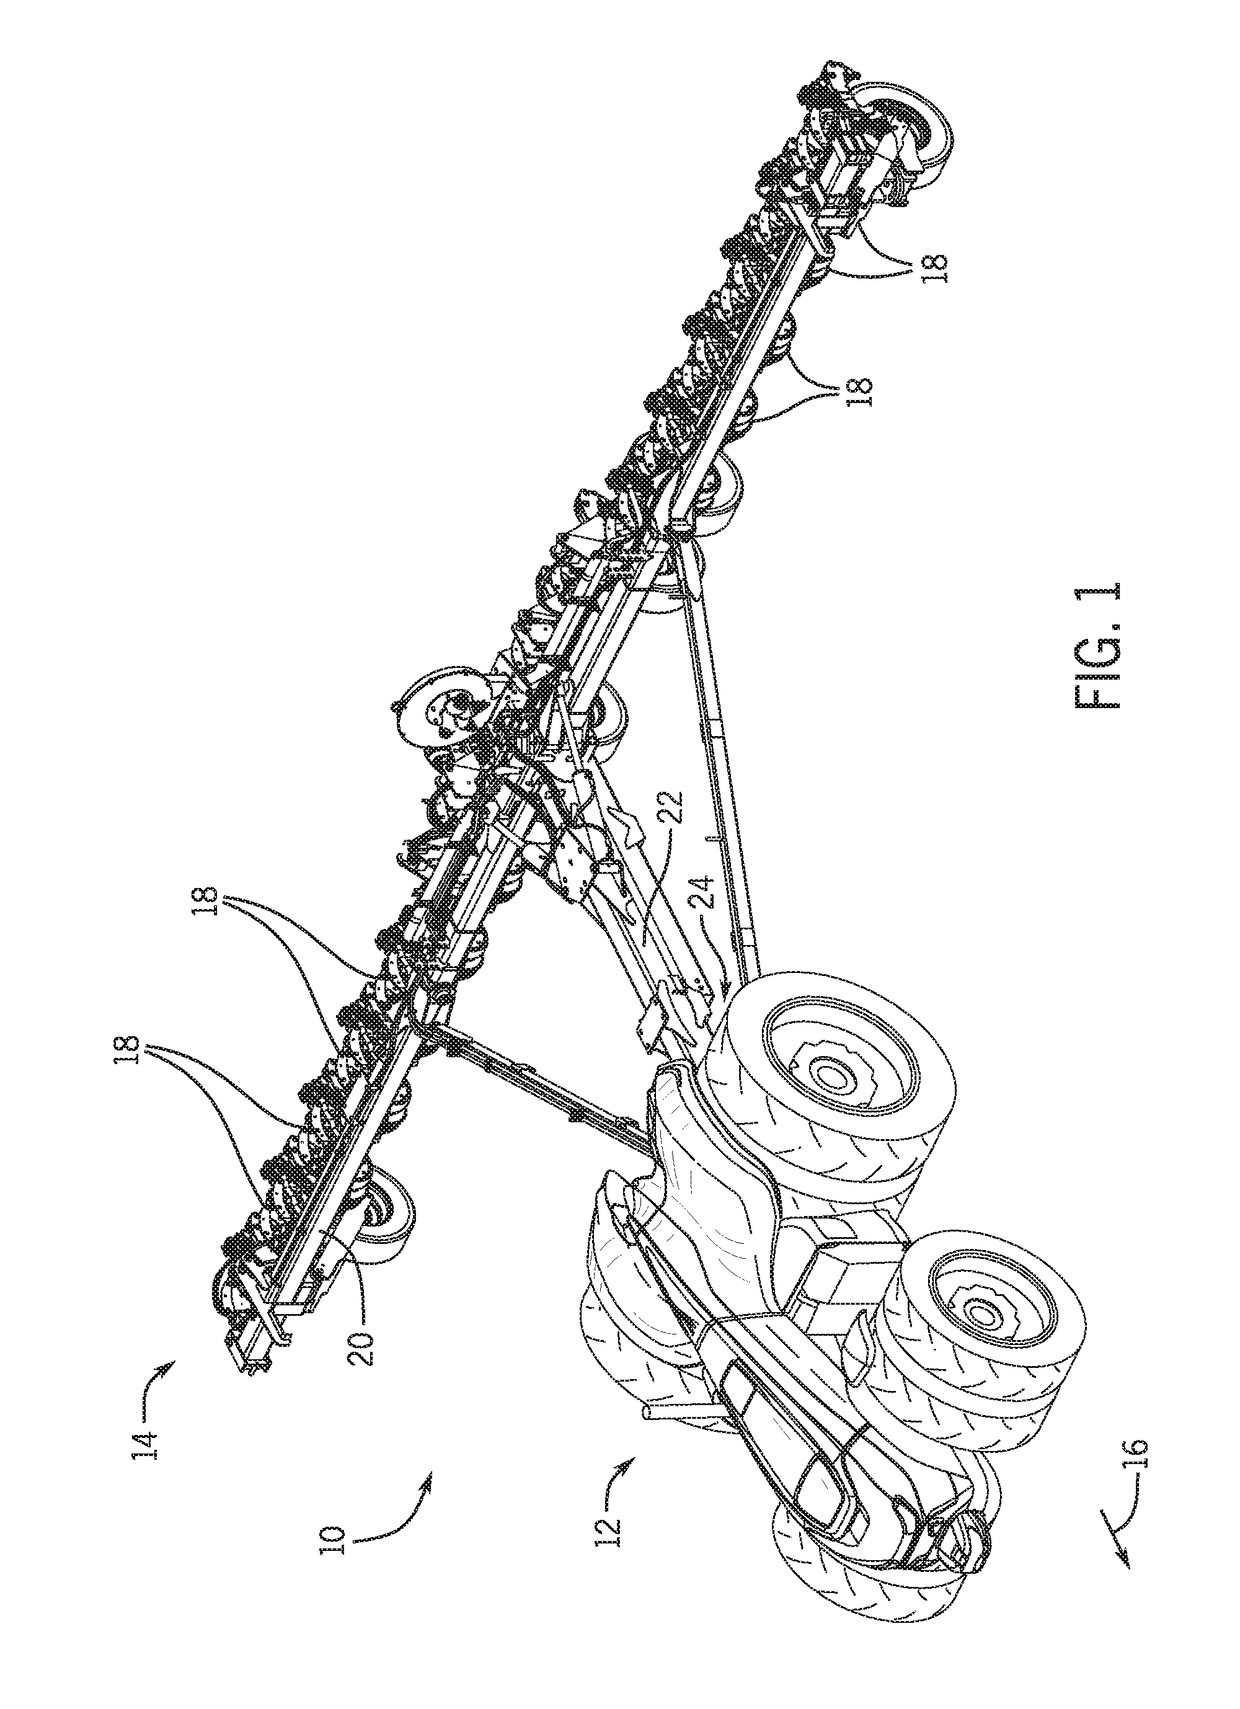 Planning system for an autonomous work vehicle system